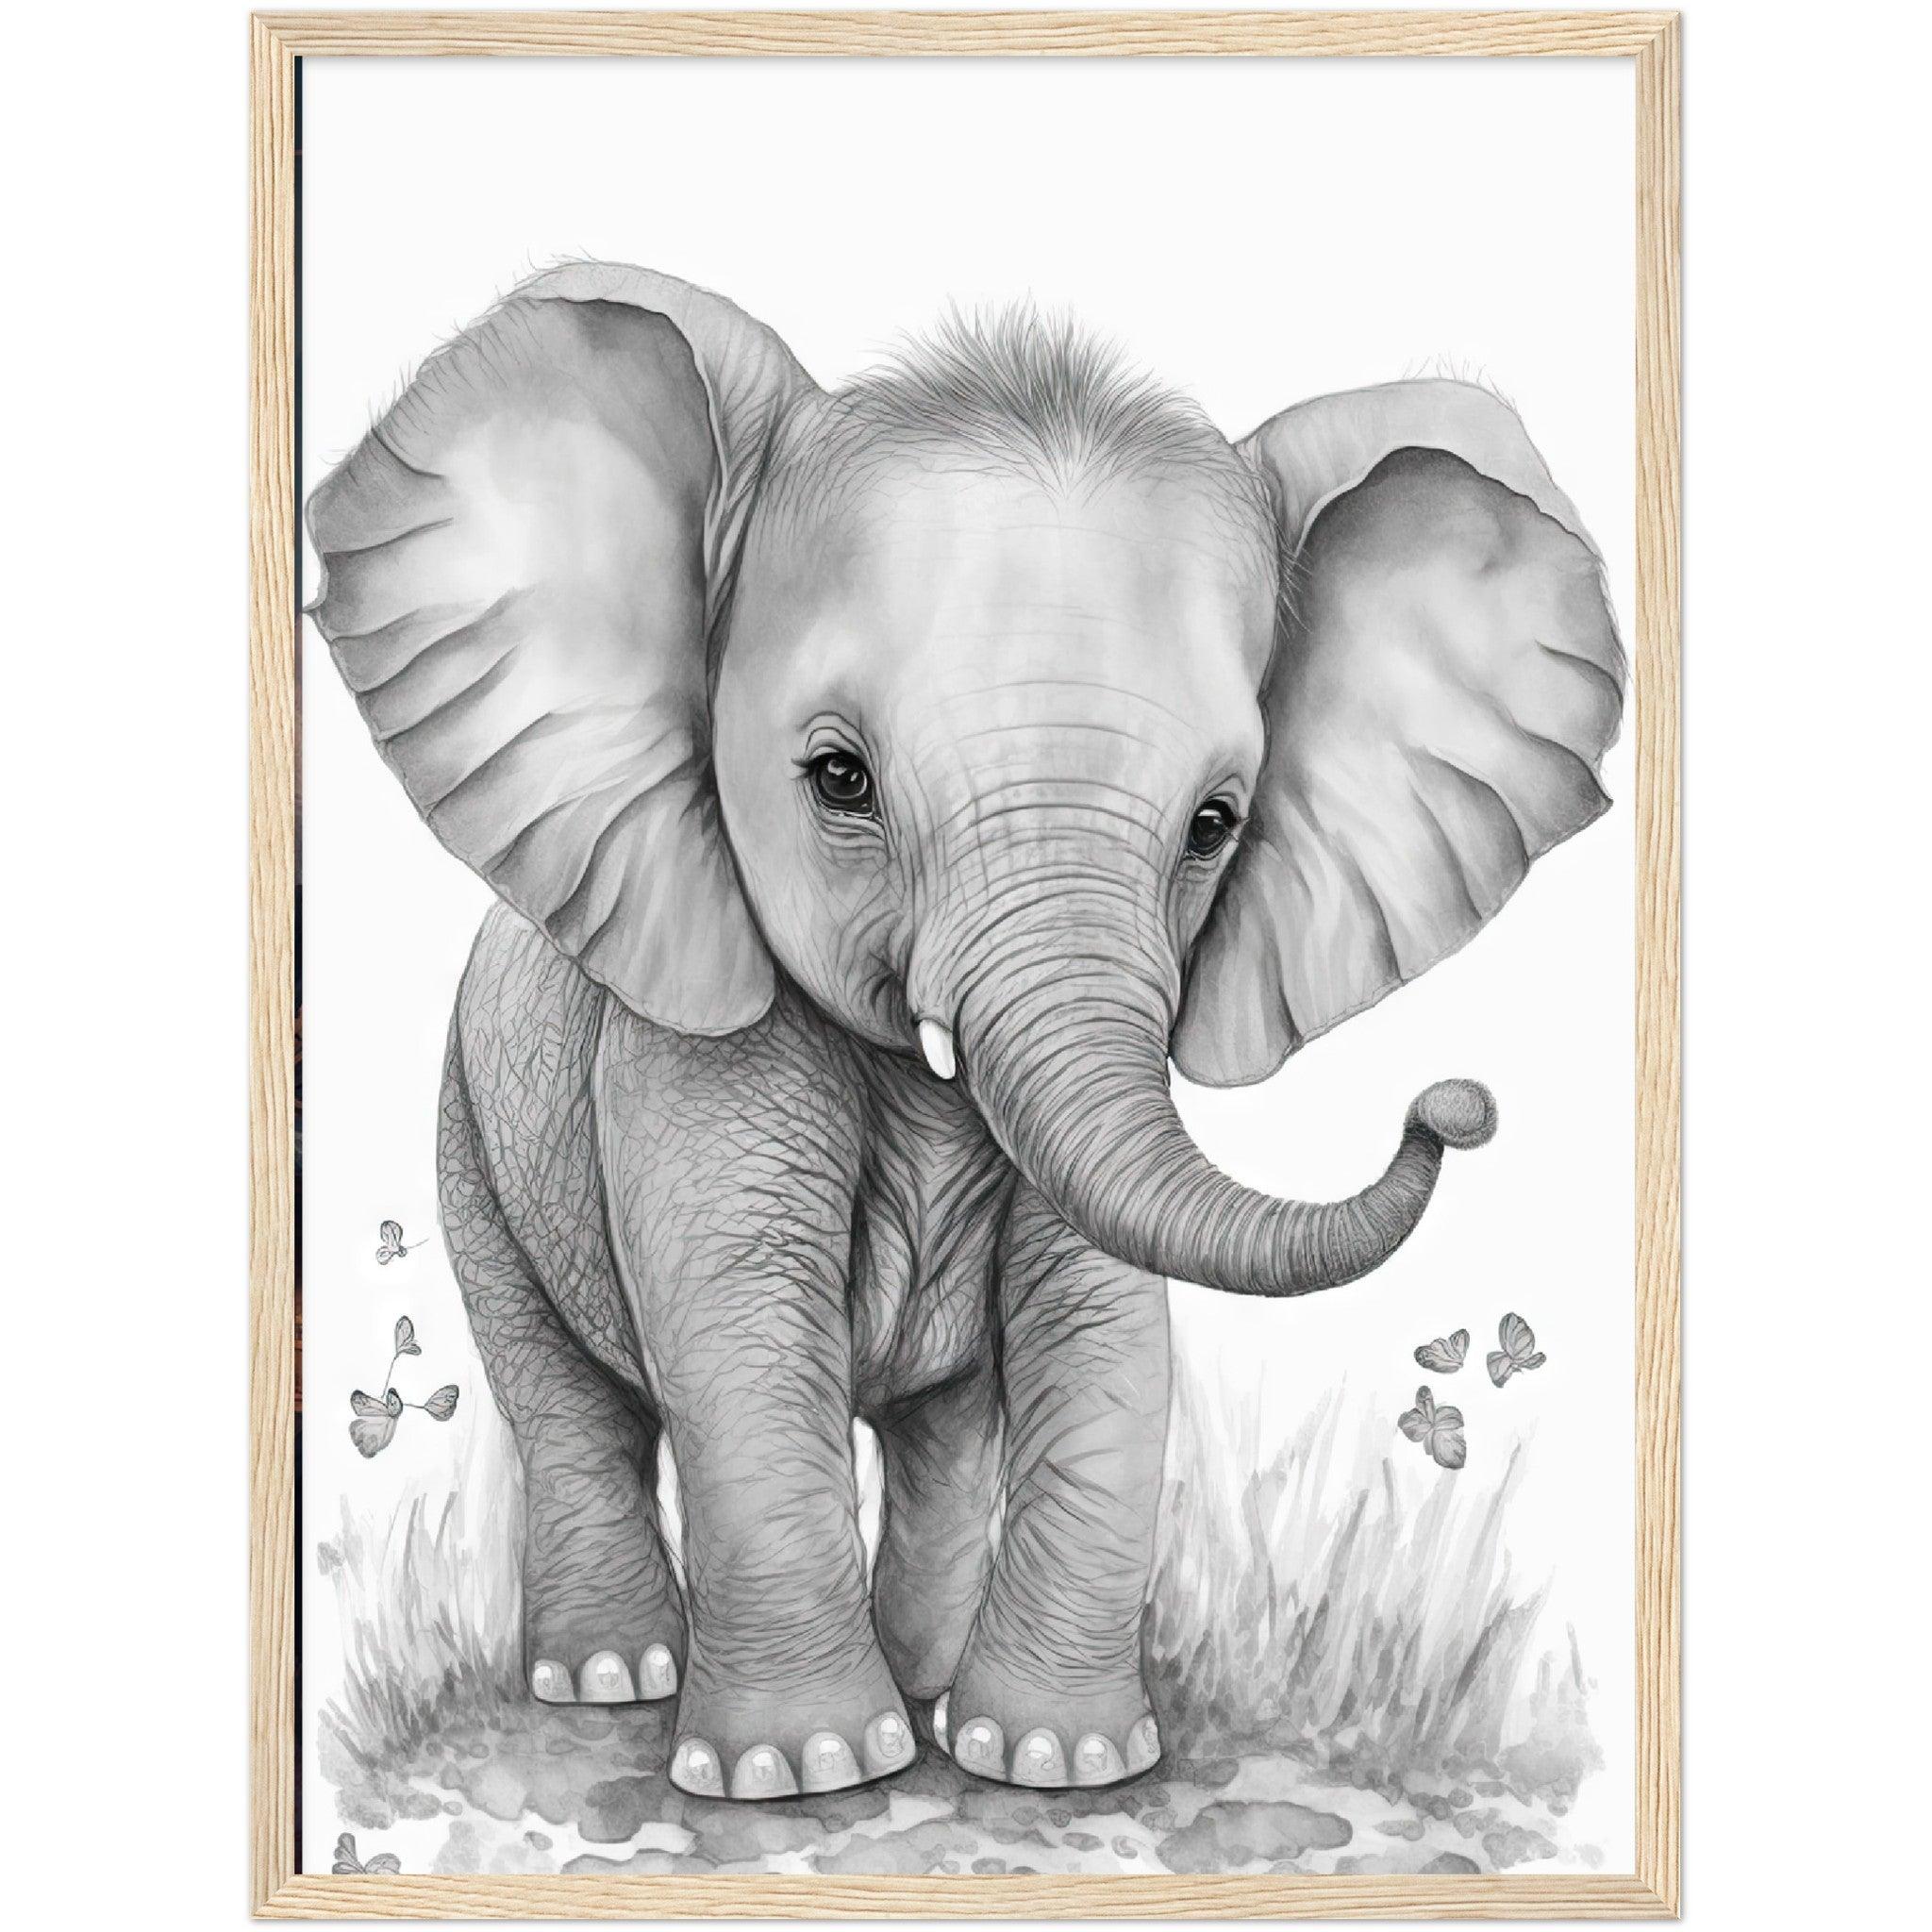 Free Printable Elephant Coloring Pages For Kids | Elephant drawing, Elephant  coloring page, Elephant canvas